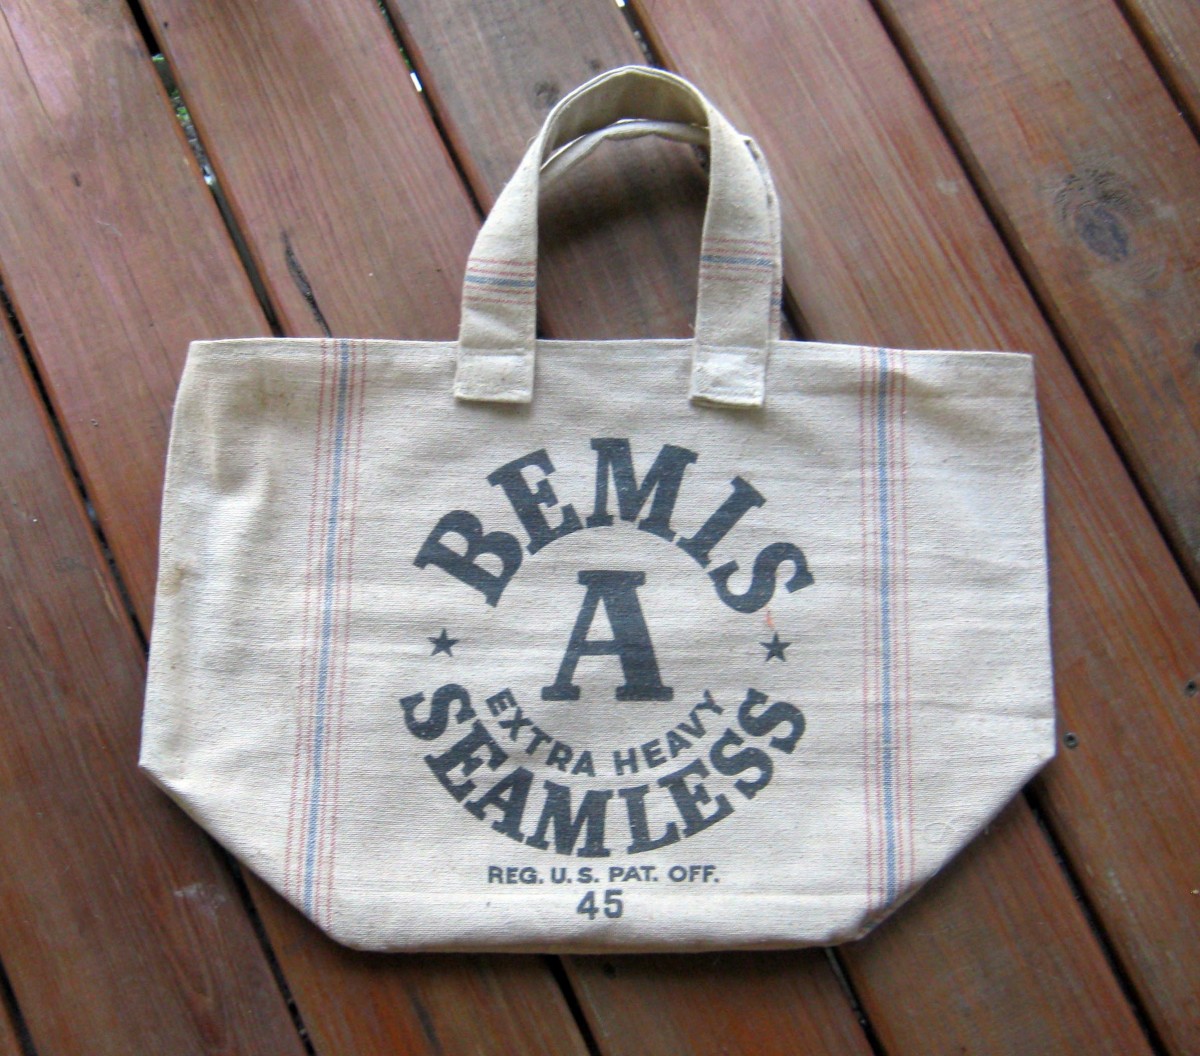 This bag is made from an old grain sack, making it strong and good for heavy items.